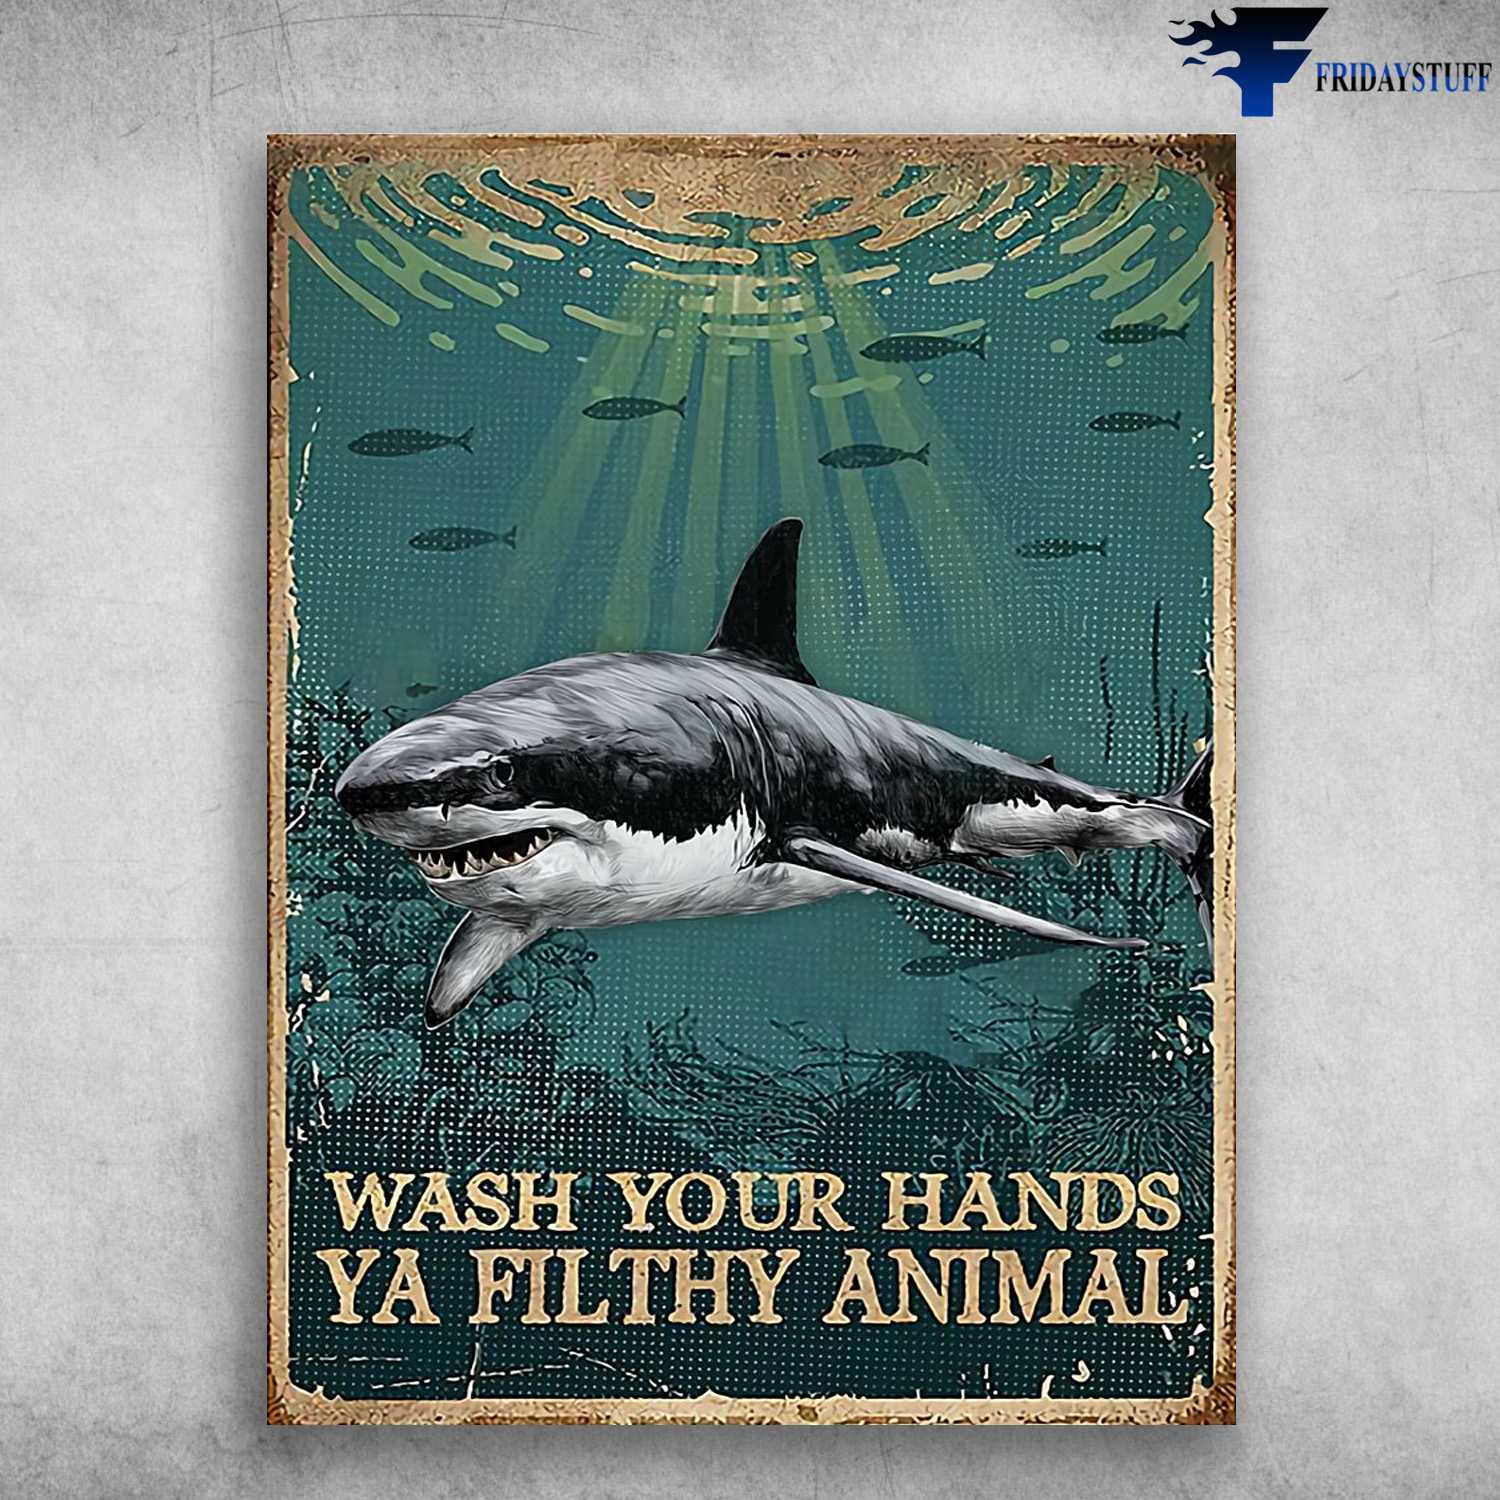 Megalodon Poster, Ocean Poster - Wash Your Hands, Ya Filthy Animal